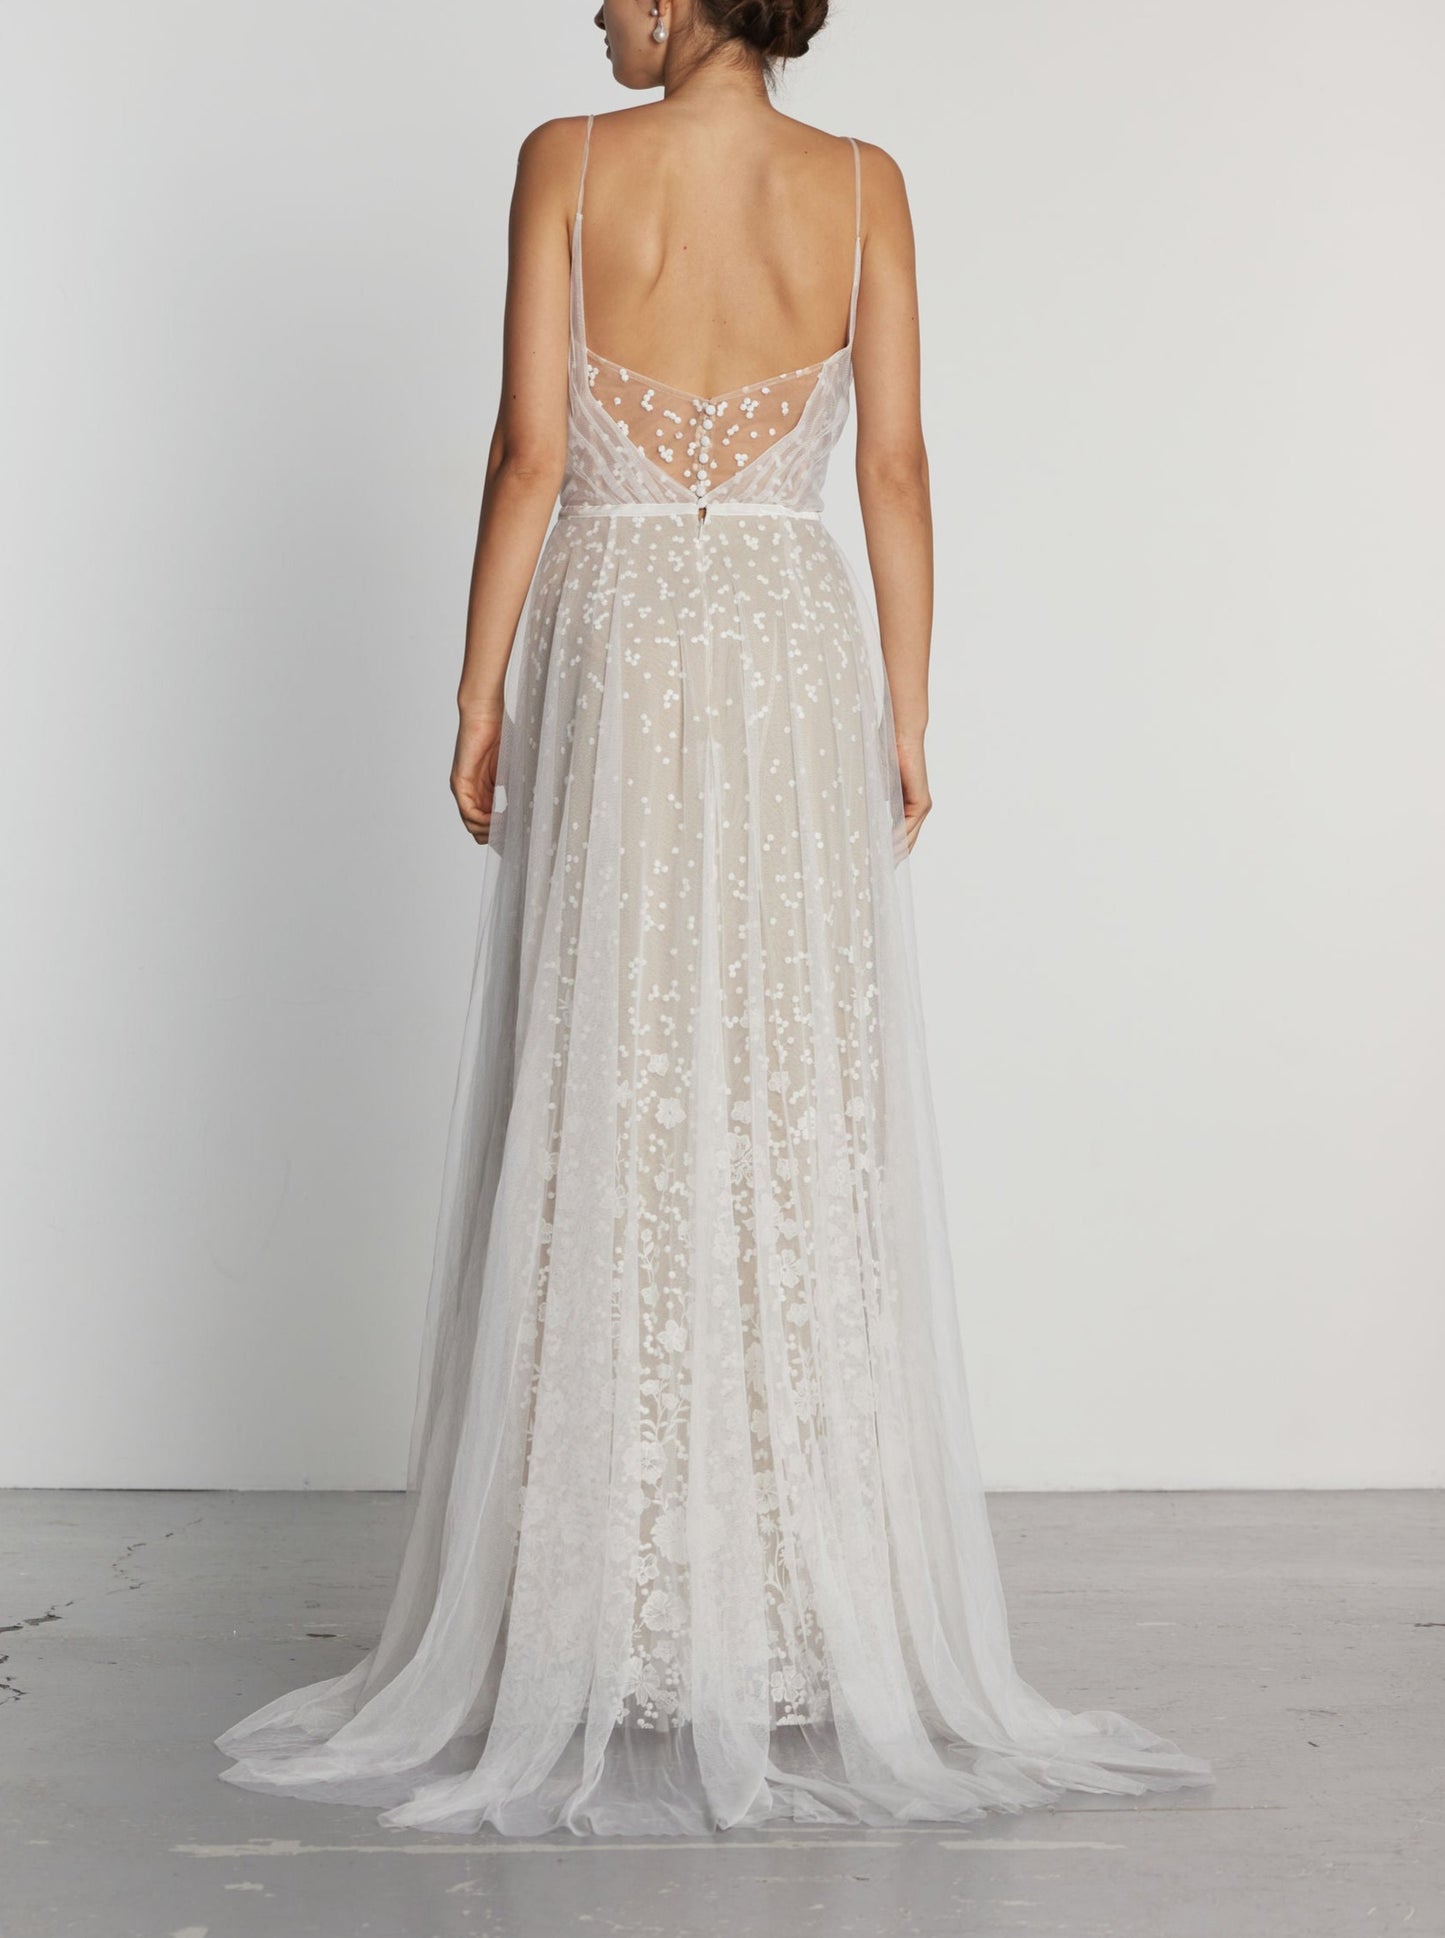 A back view of the Colden Floral Embroidery Lace Wedding Dress